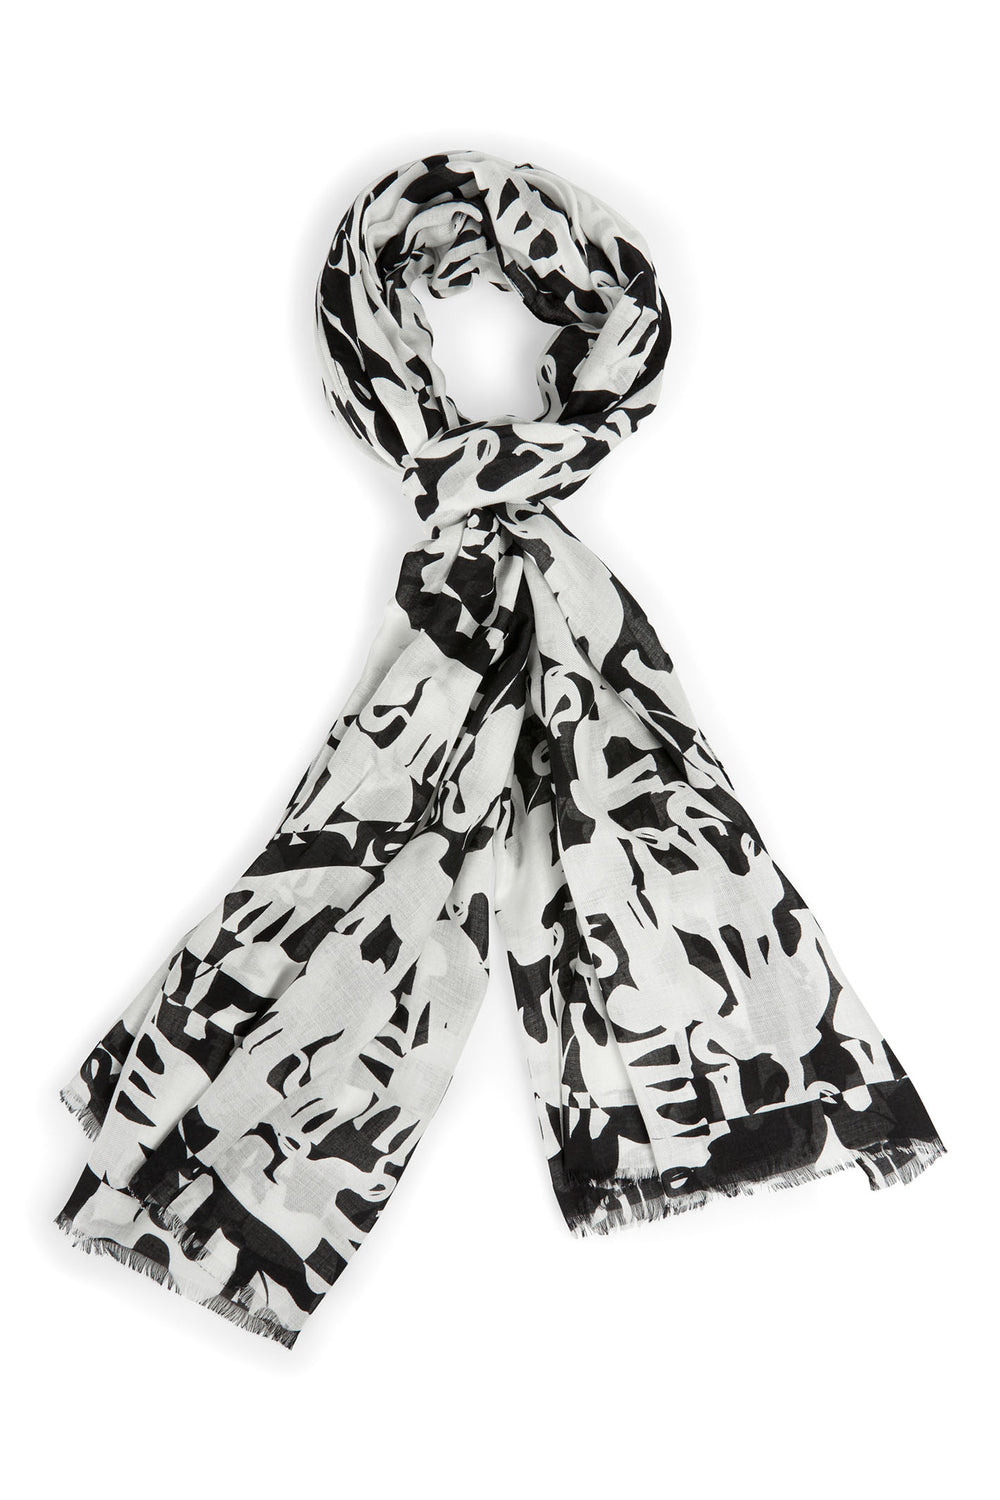 Marc Cain Collection WC B4.07 Z15 190 White Black Scarf - Olivia Grace Fashion